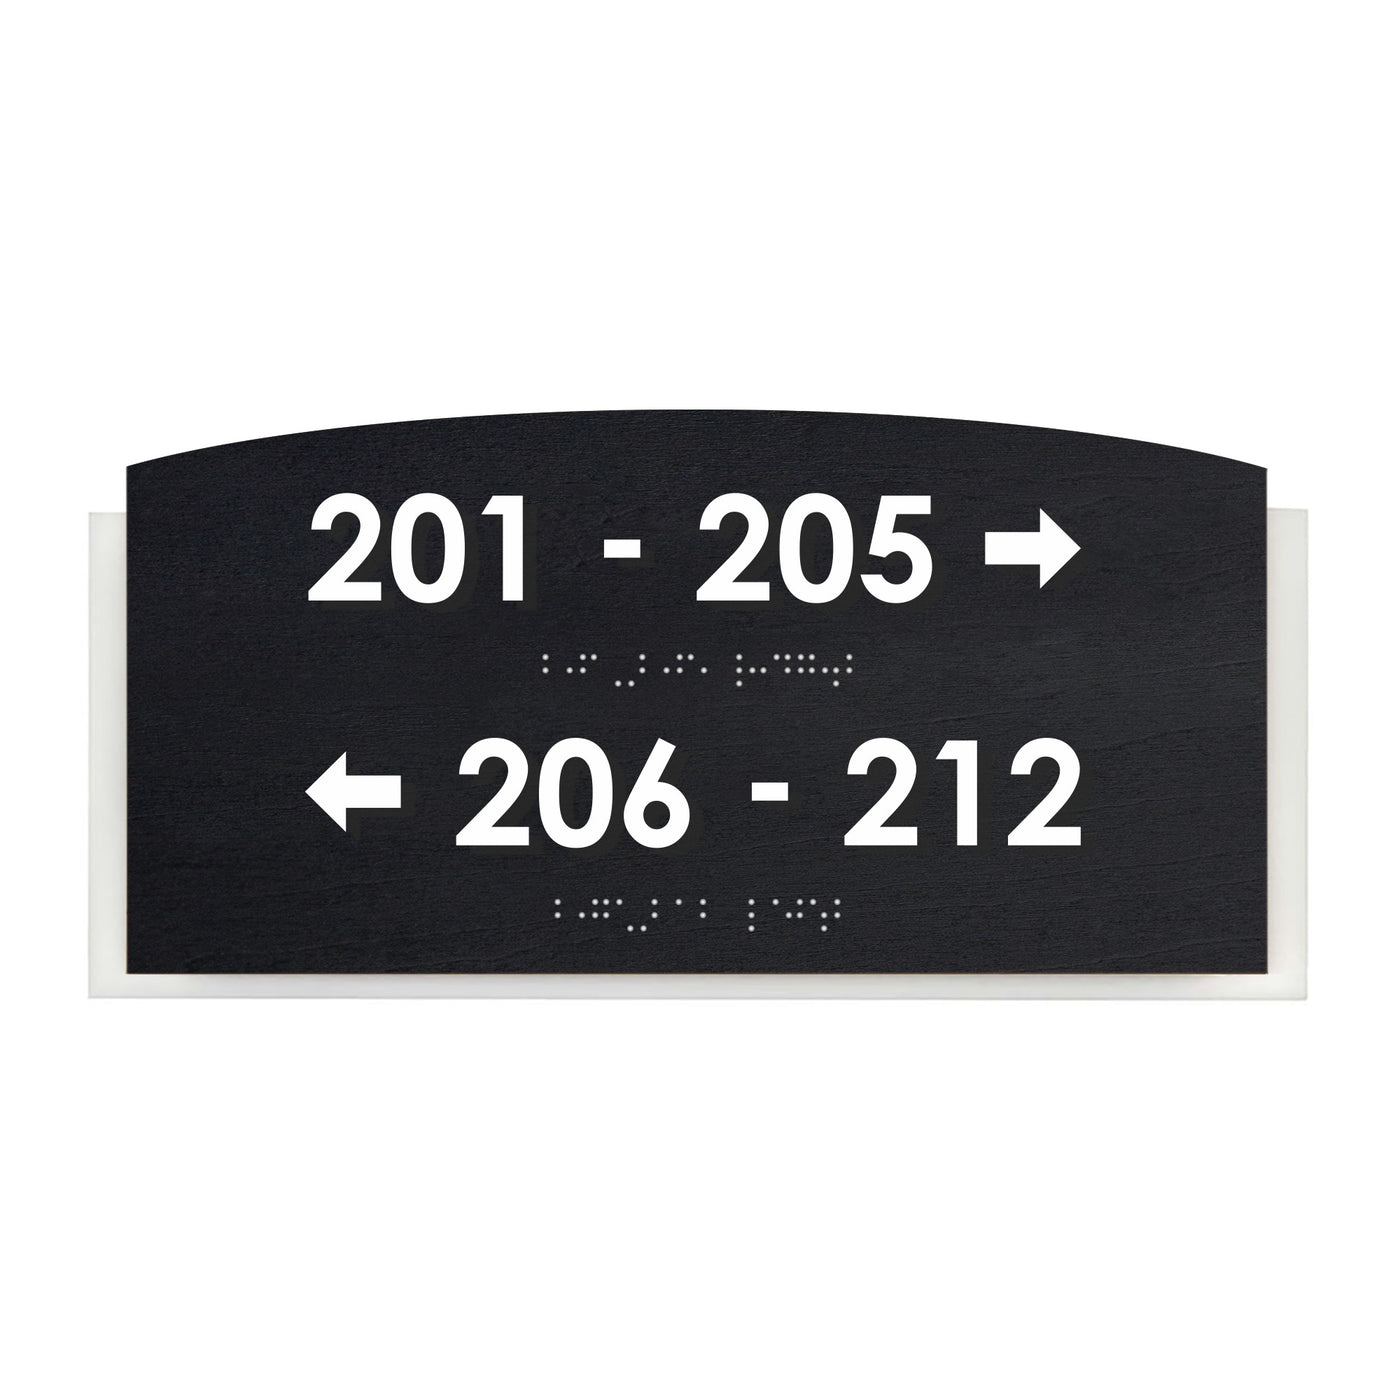 Directional Sign - Wayfinding Wall Plate "Scandza" Design